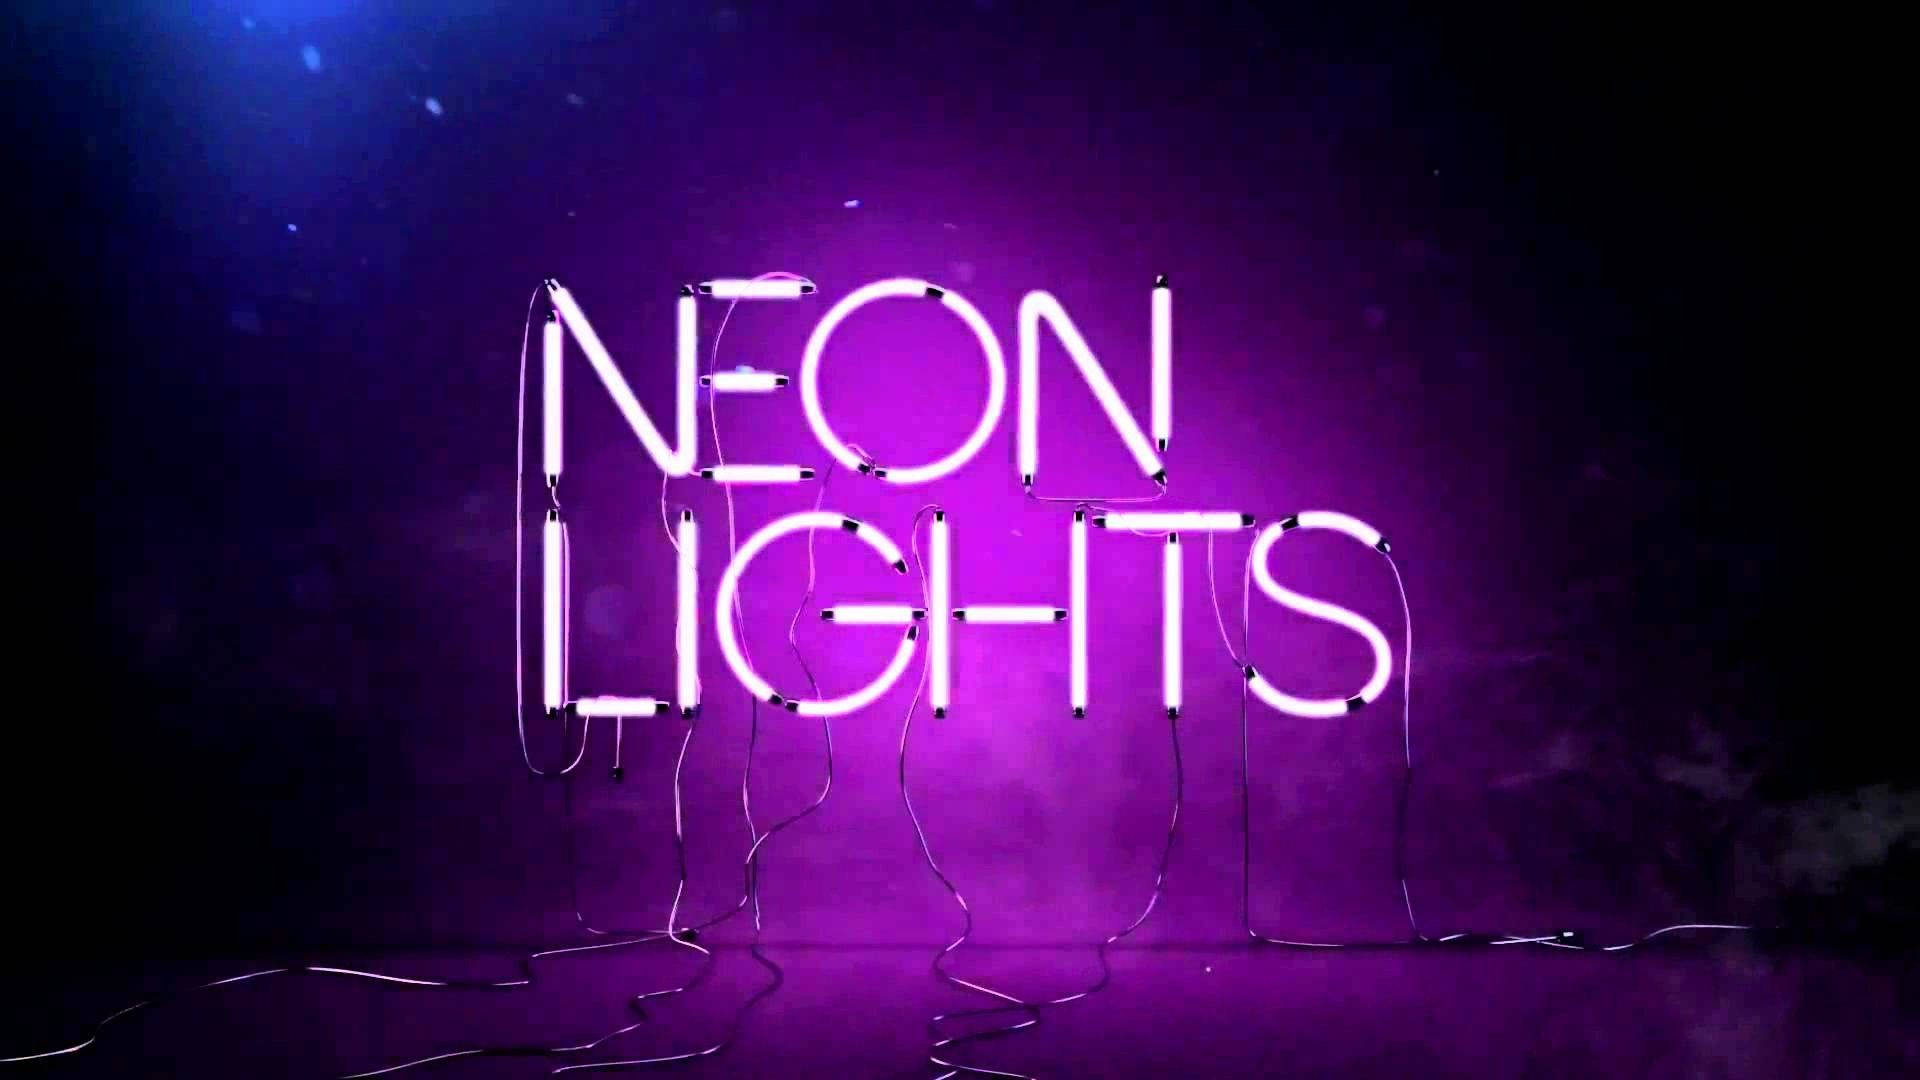 Explore the fantasy world of Purple Aesthetic with neon lights Wallpaper